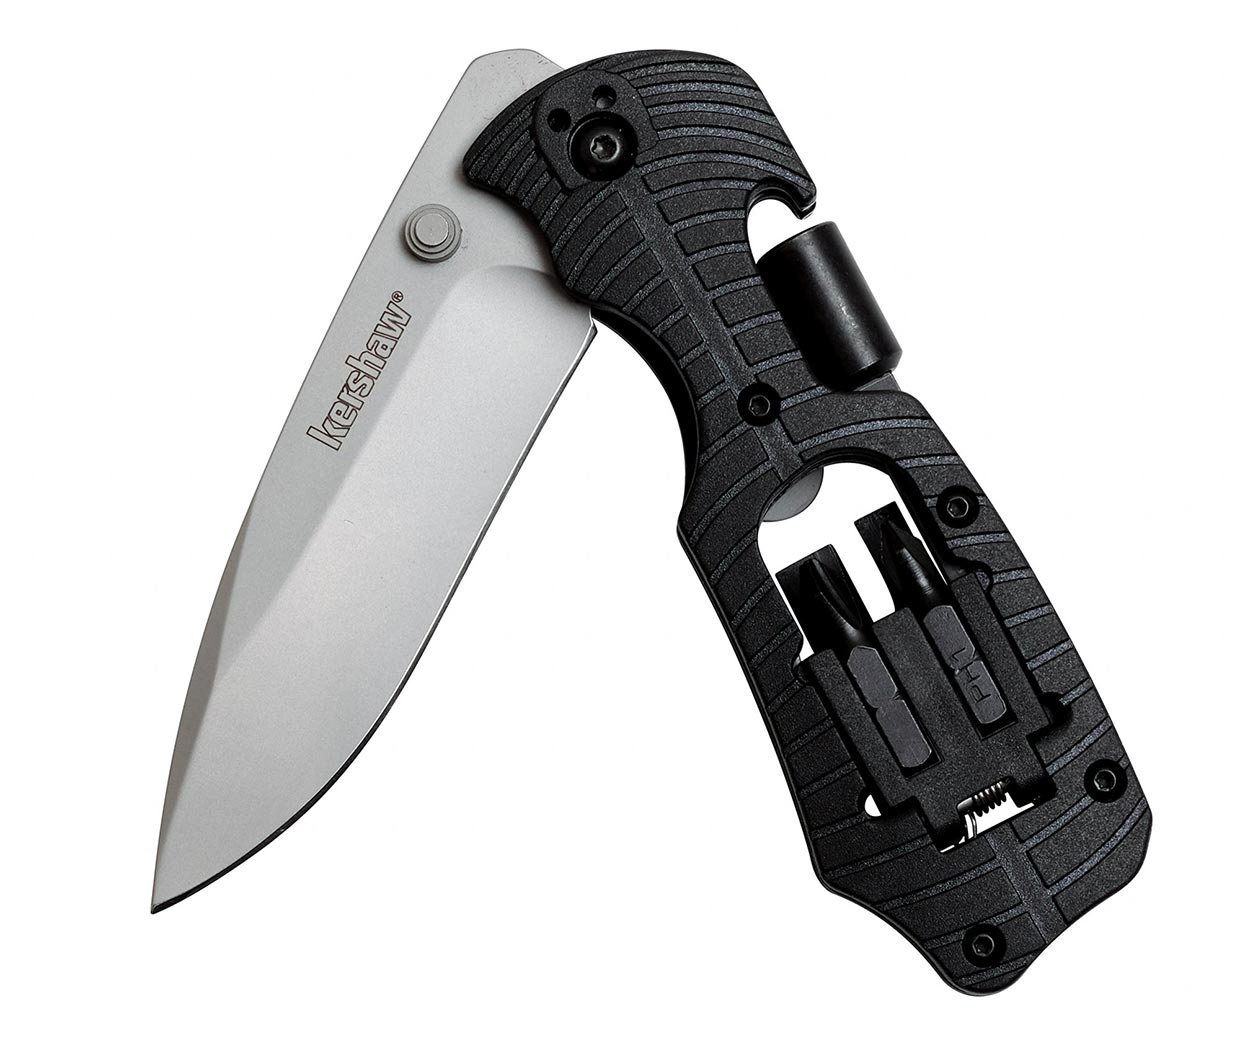 Kershaw Select Fire Multifunction Pocket Knife Includes a